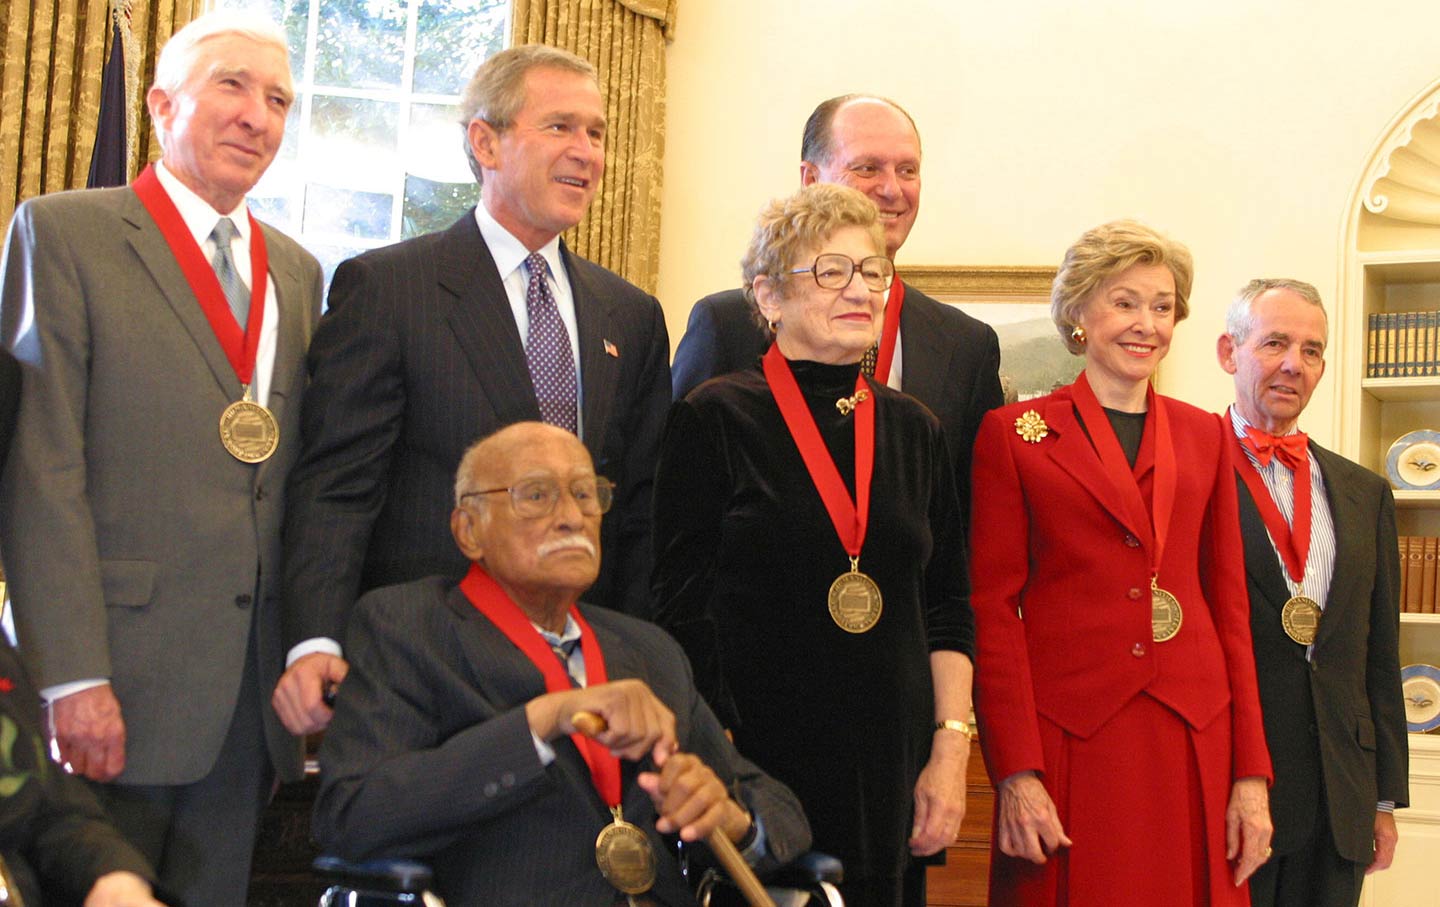 George Bush with Midge Decter et al. in the Oval Office